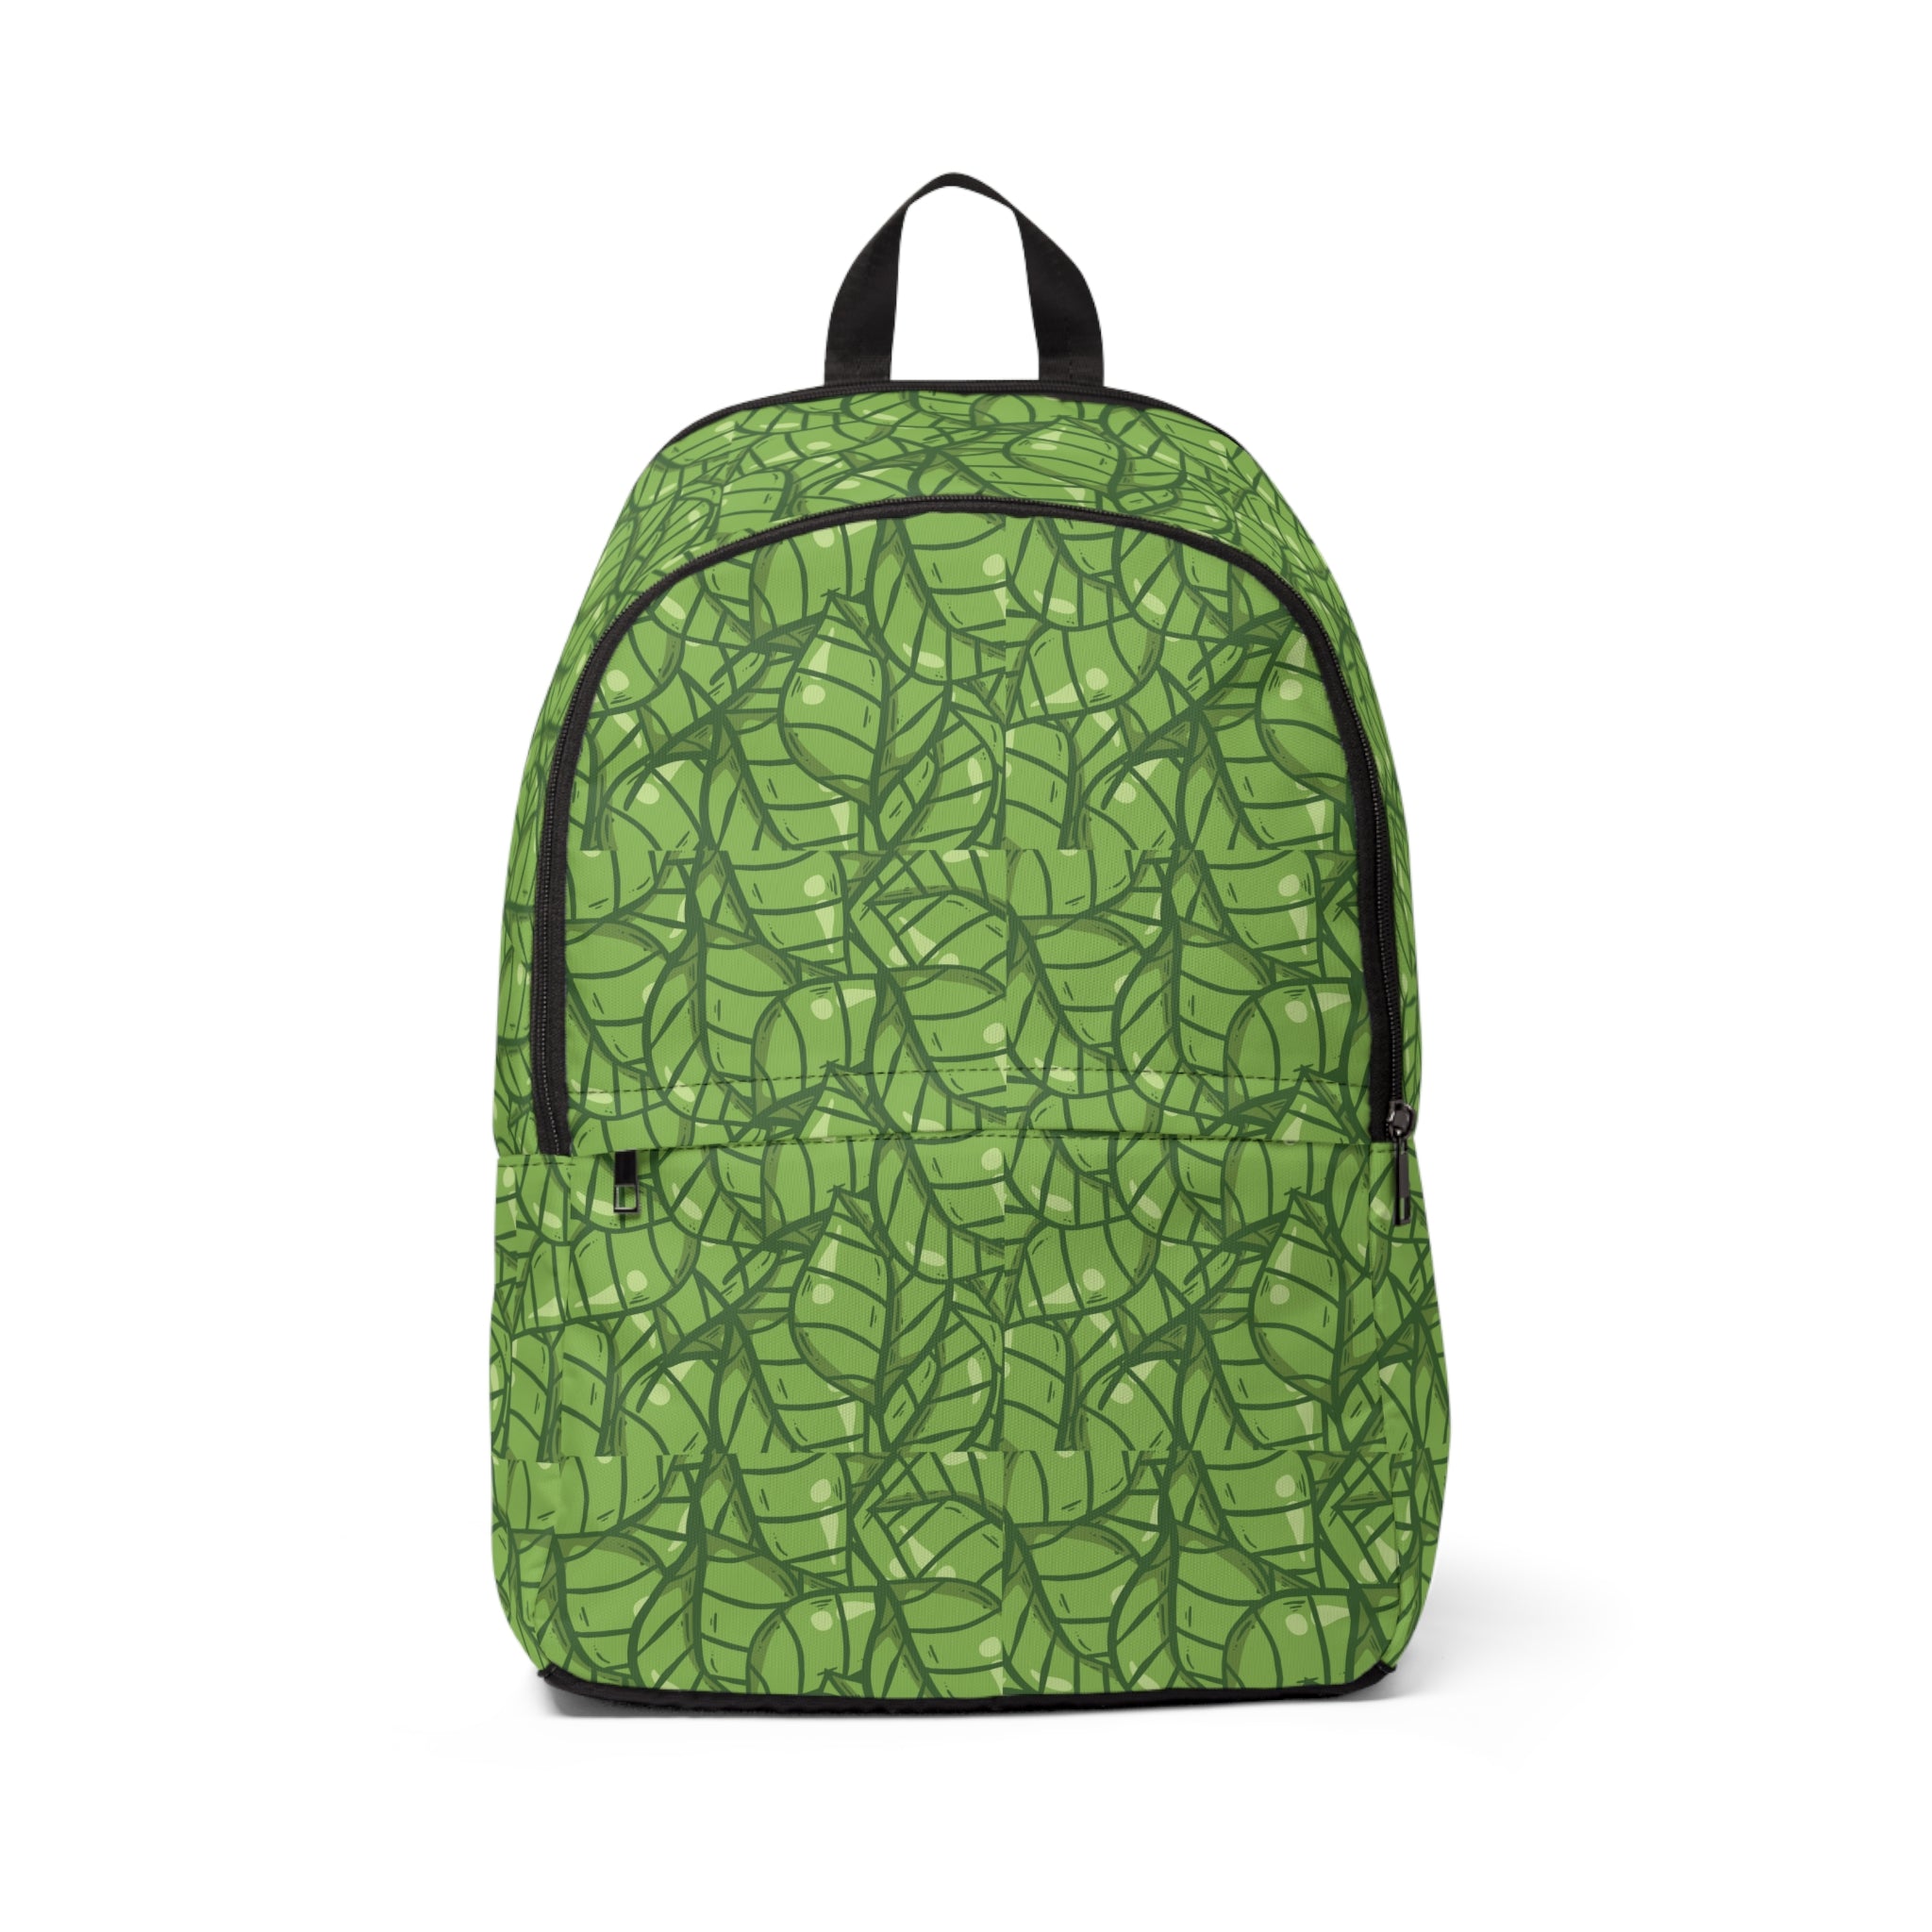 Unisex Fabric Backpack Green Leaves